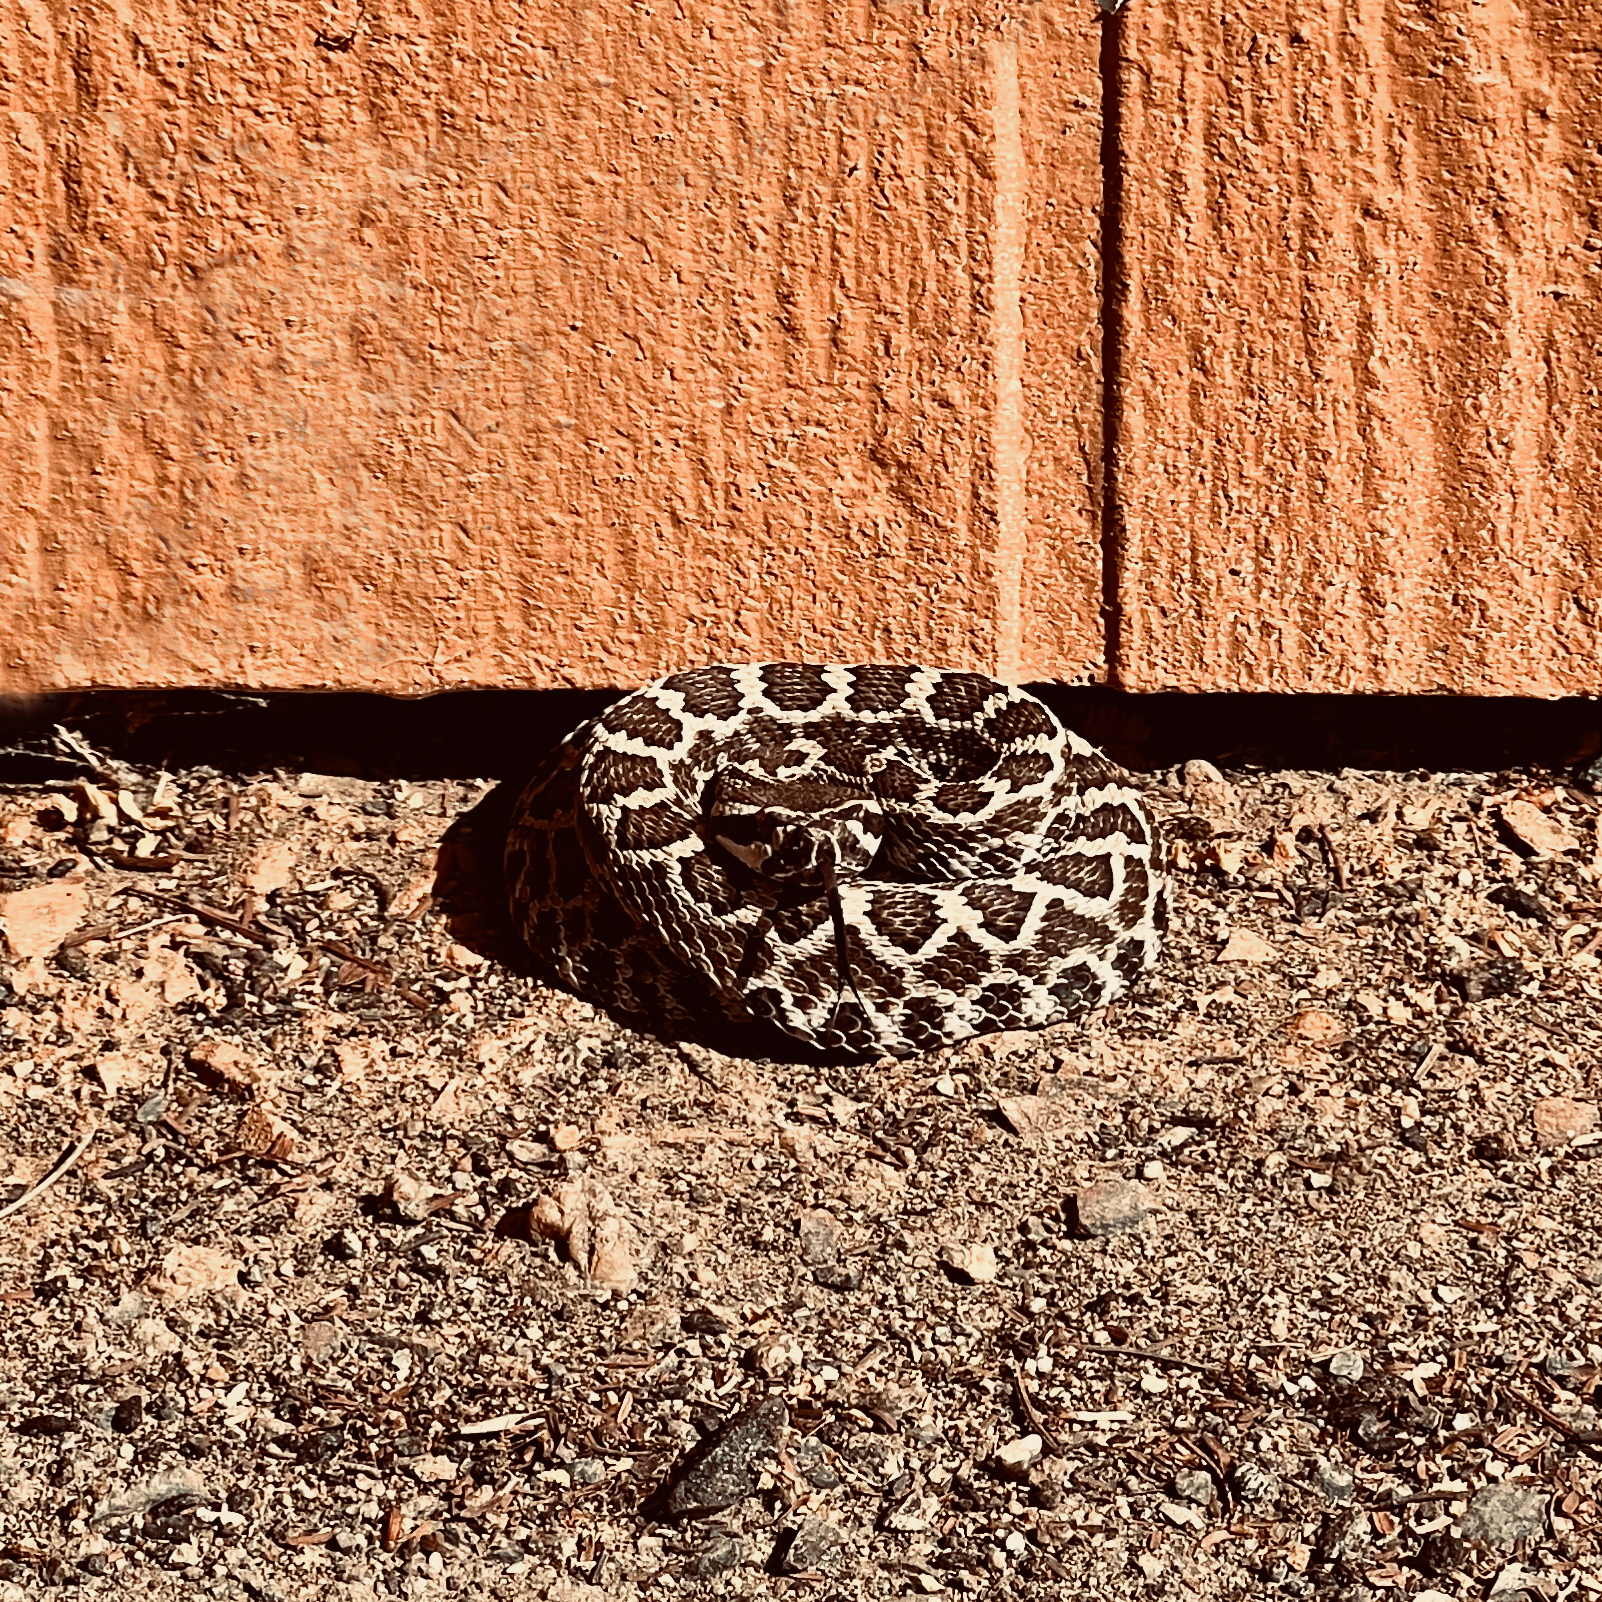 Rattle snake coiled